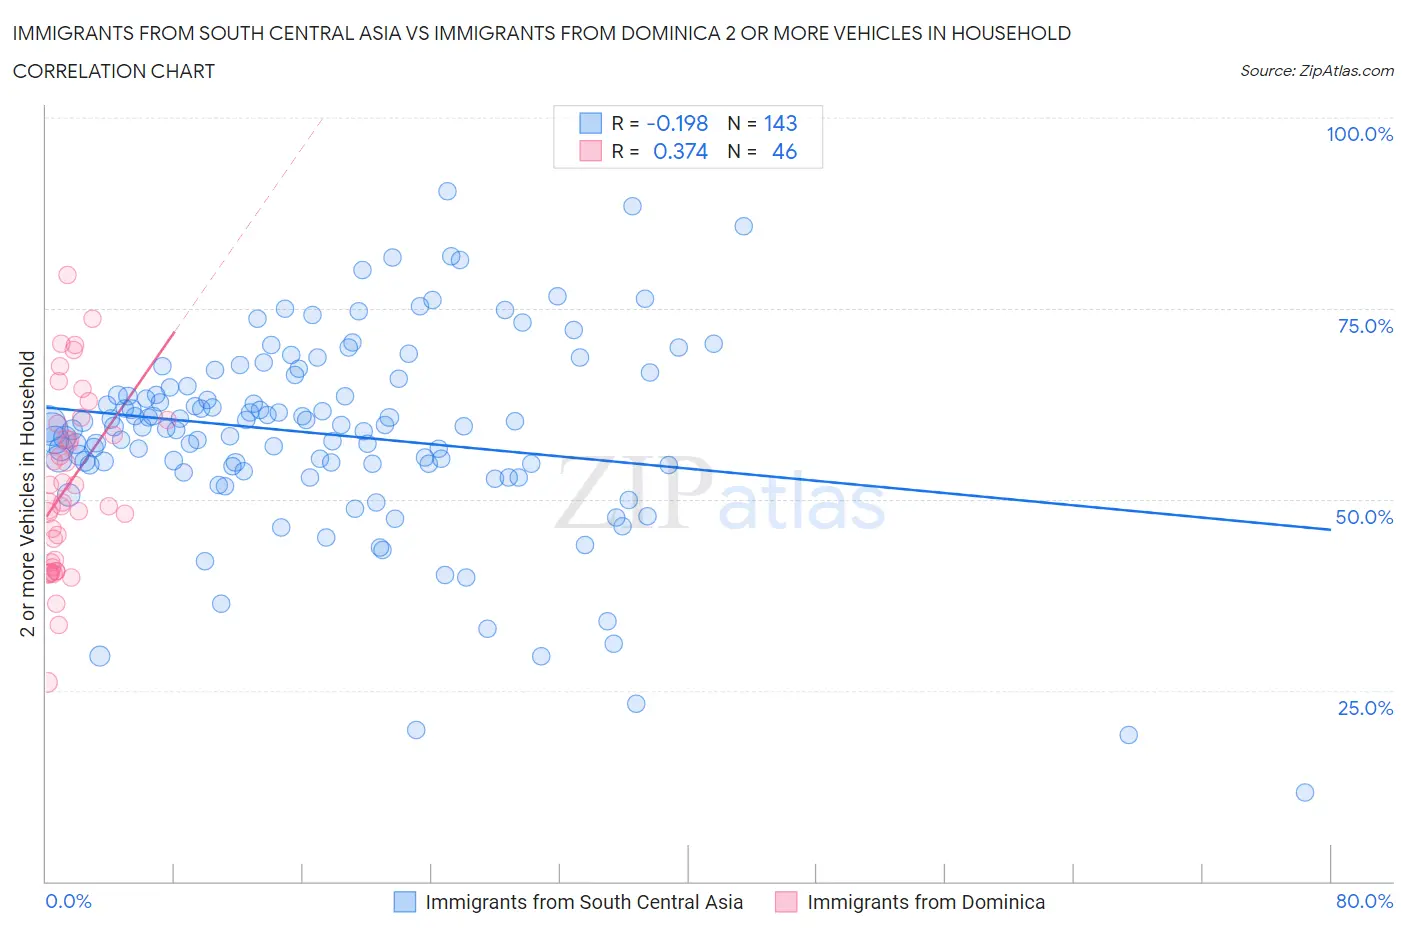 Immigrants from South Central Asia vs Immigrants from Dominica 2 or more Vehicles in Household